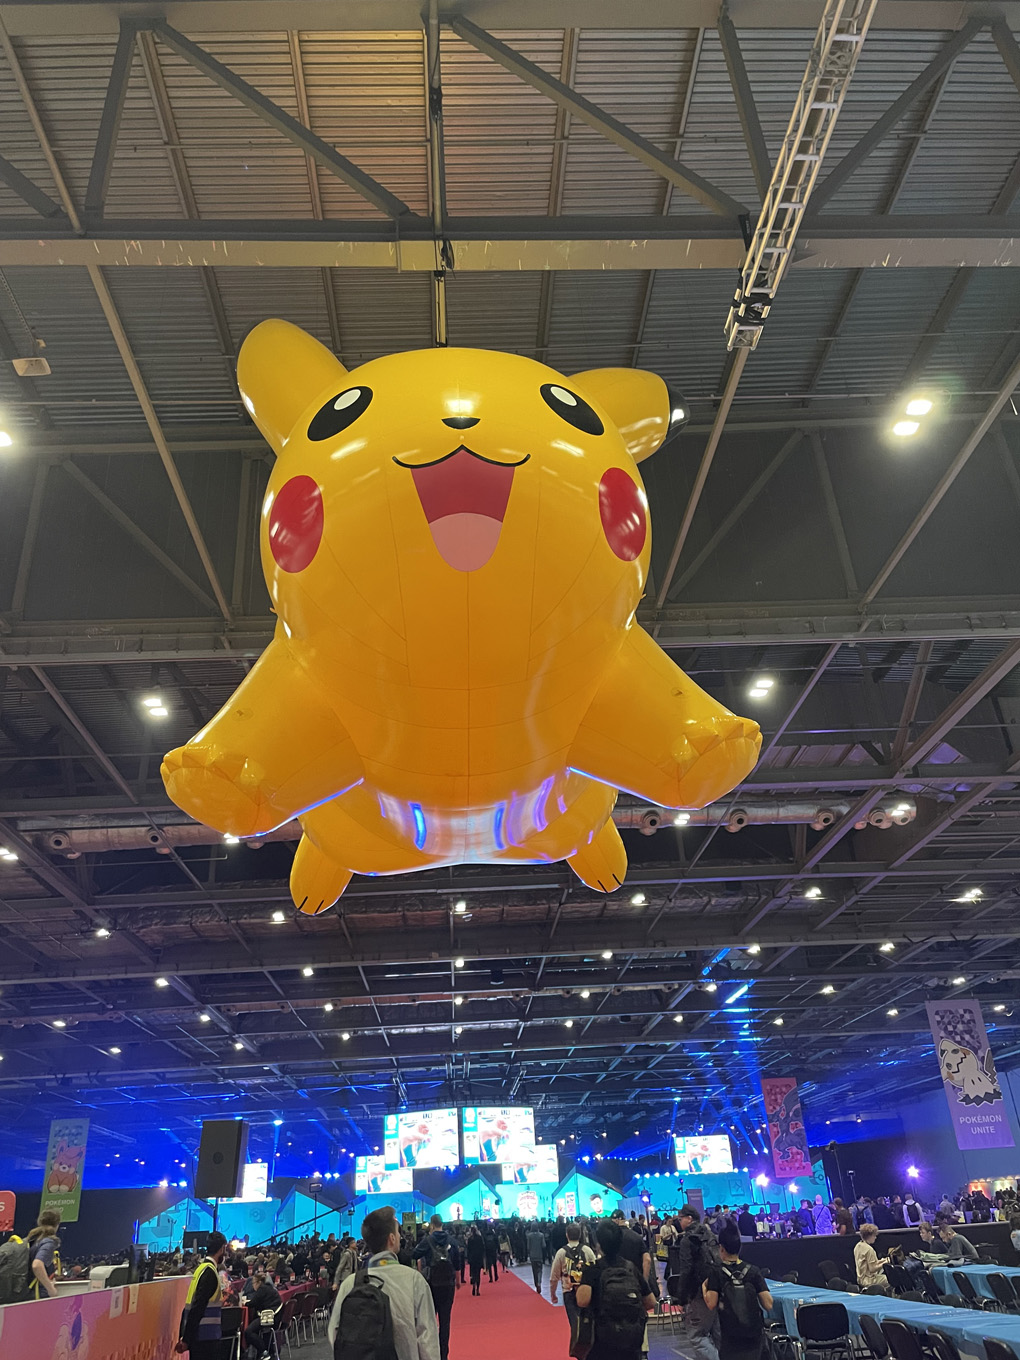 Inflatable giant Pikachu suspended over a conference venue